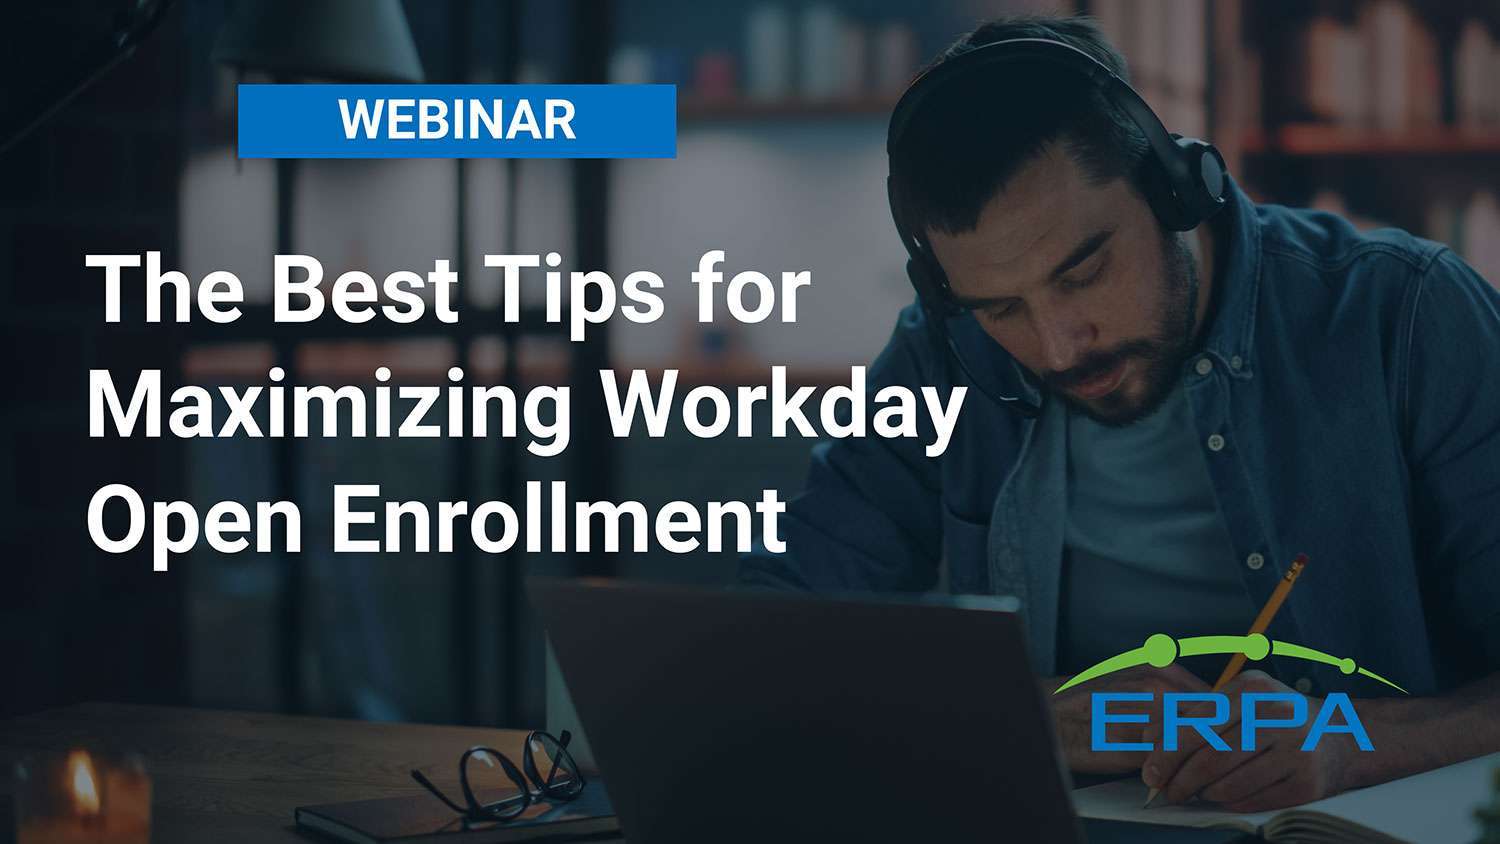 ERPA Webinar: The Best Tips for Maximizing Workday Open Enrollment